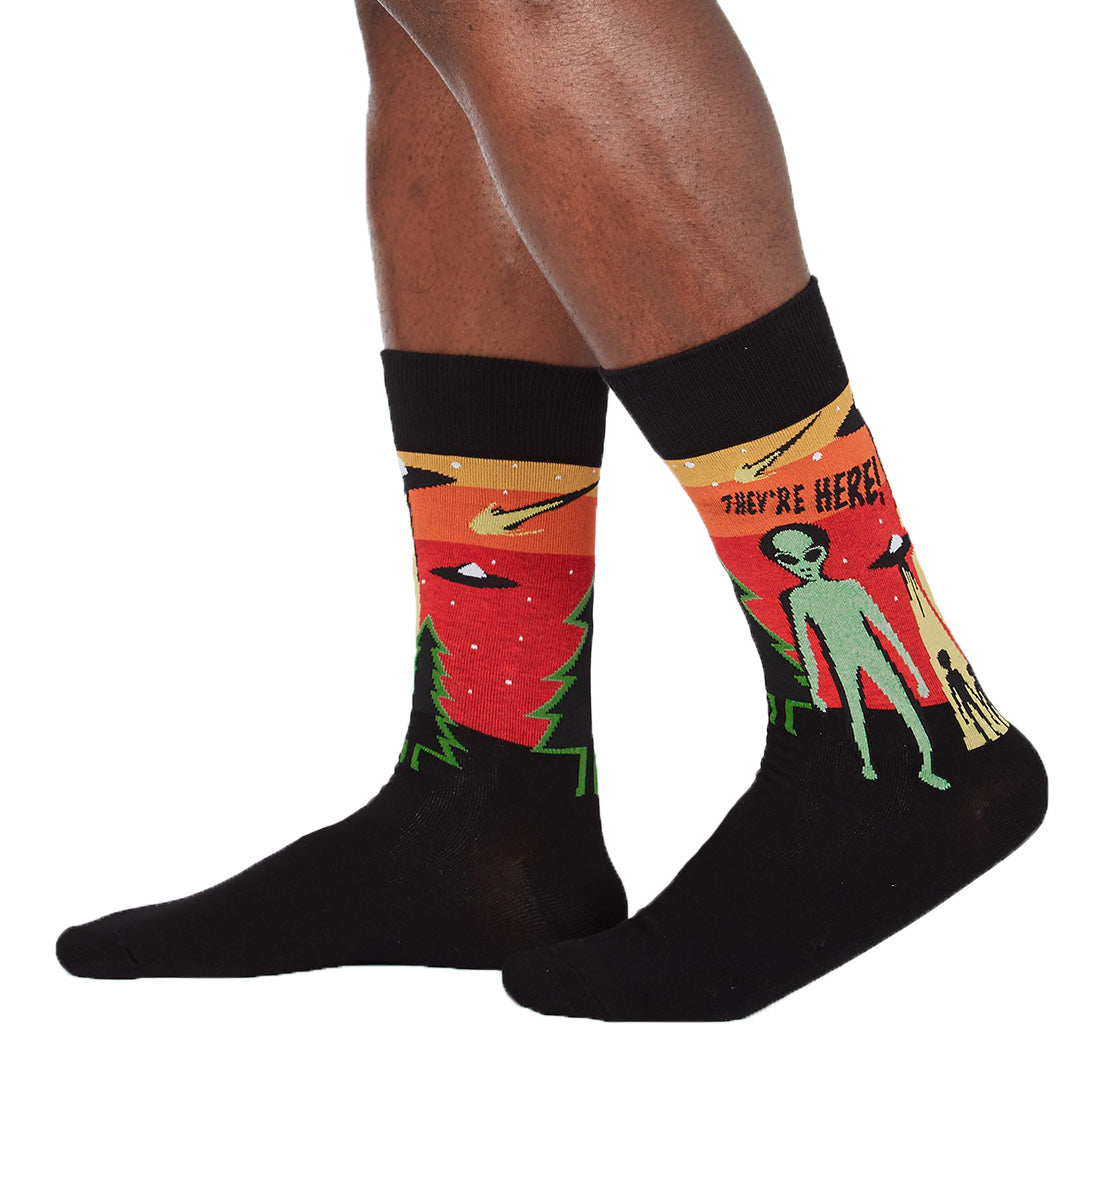 SOCK it to me Men's Crew Socks (mef0385),They're Here - They're Here,One Size